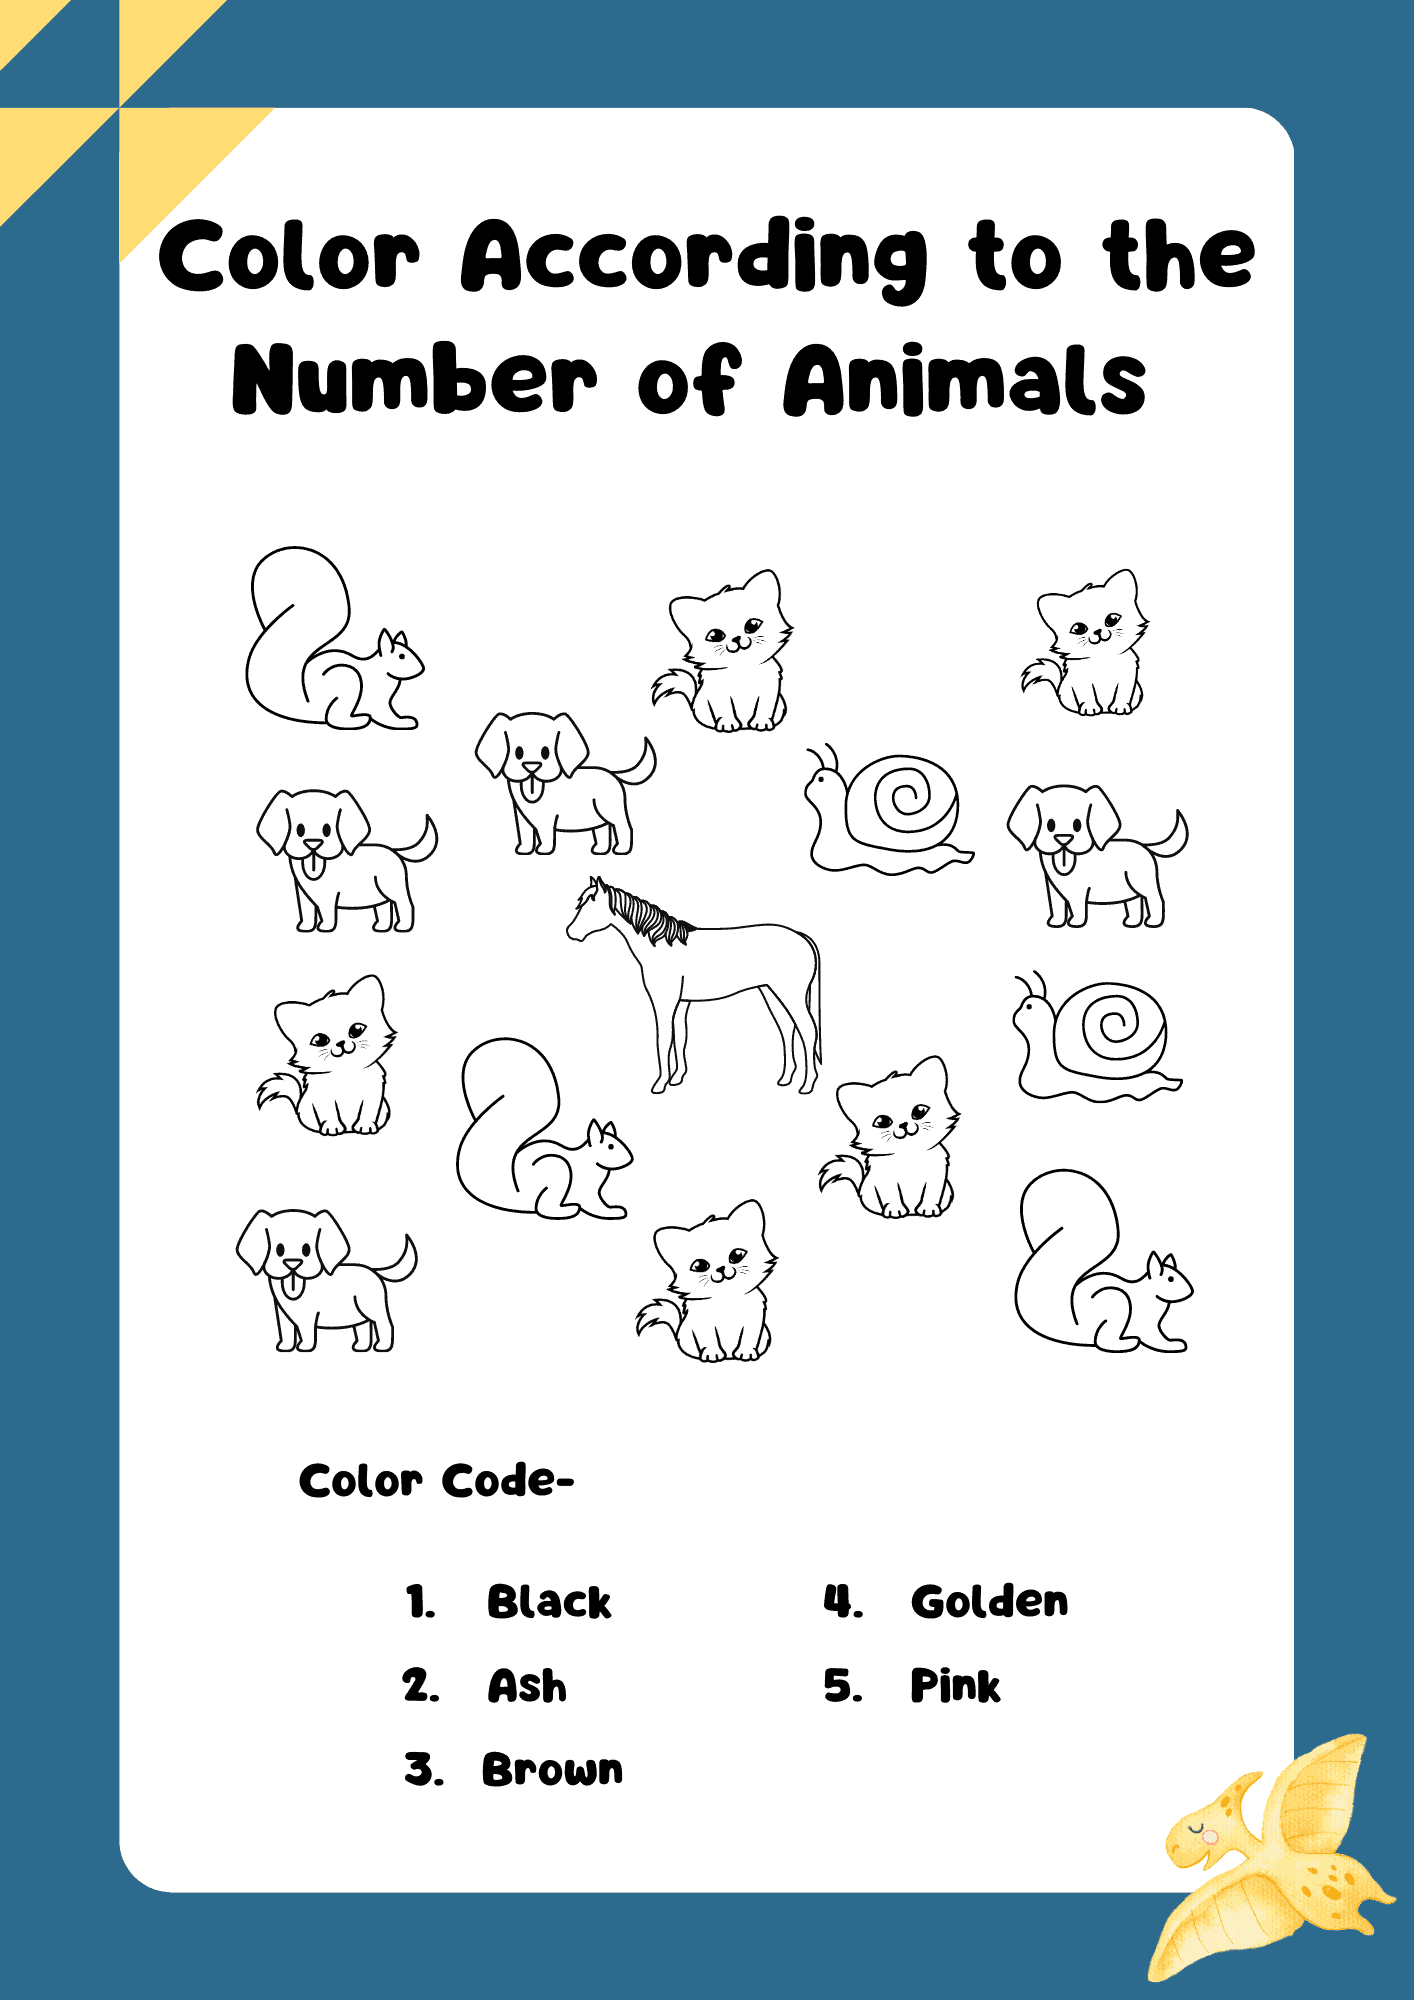 Coloring Animals from Color Code after Counting Them